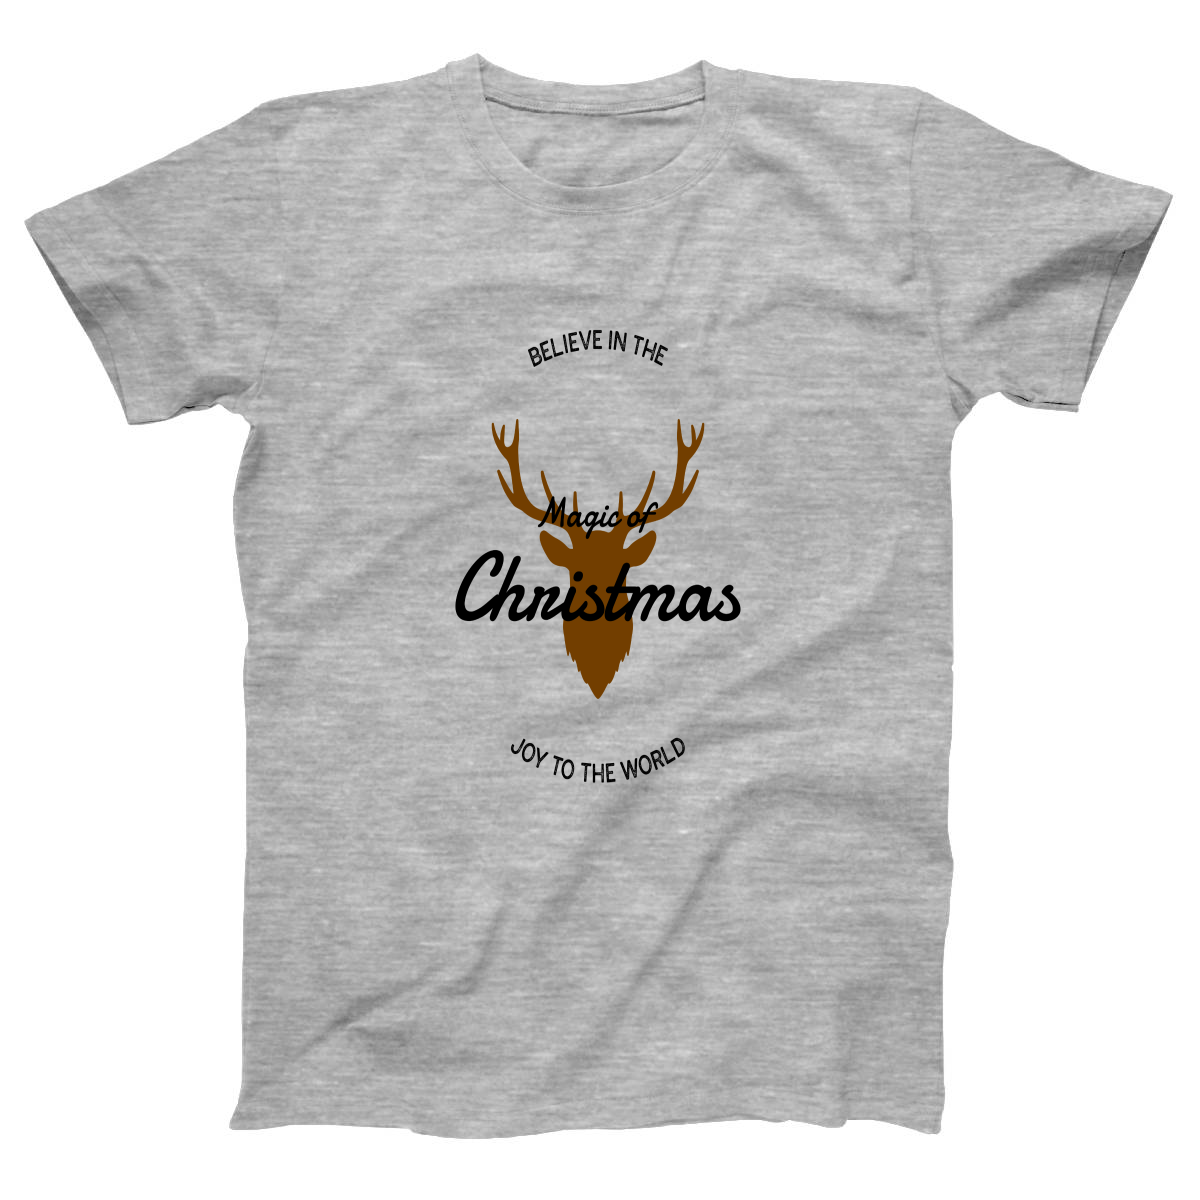 Believe in the Magic of Christmas Joy to the World Women's T-shirt | Gray